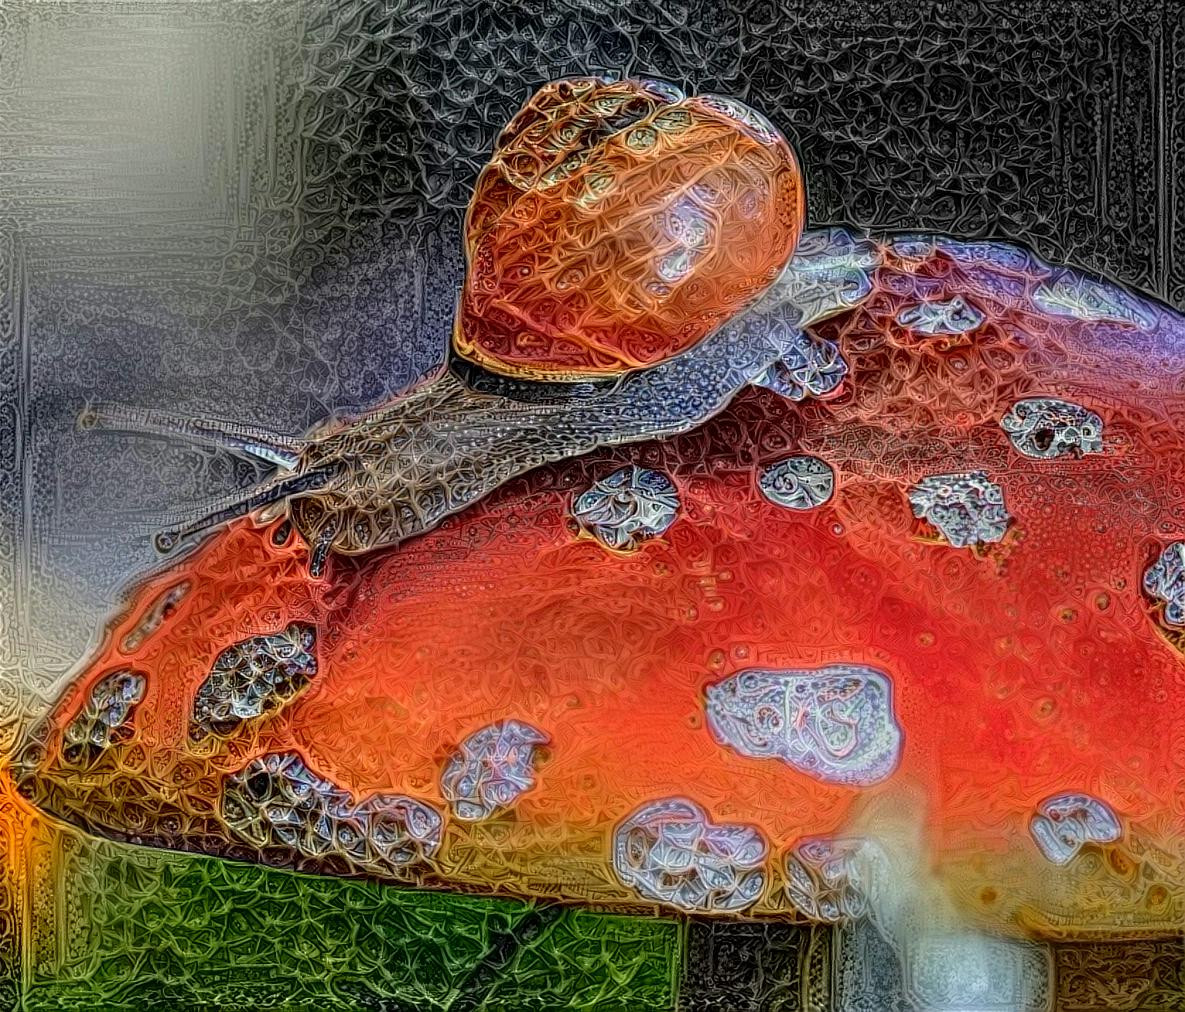 snail and fly agaric